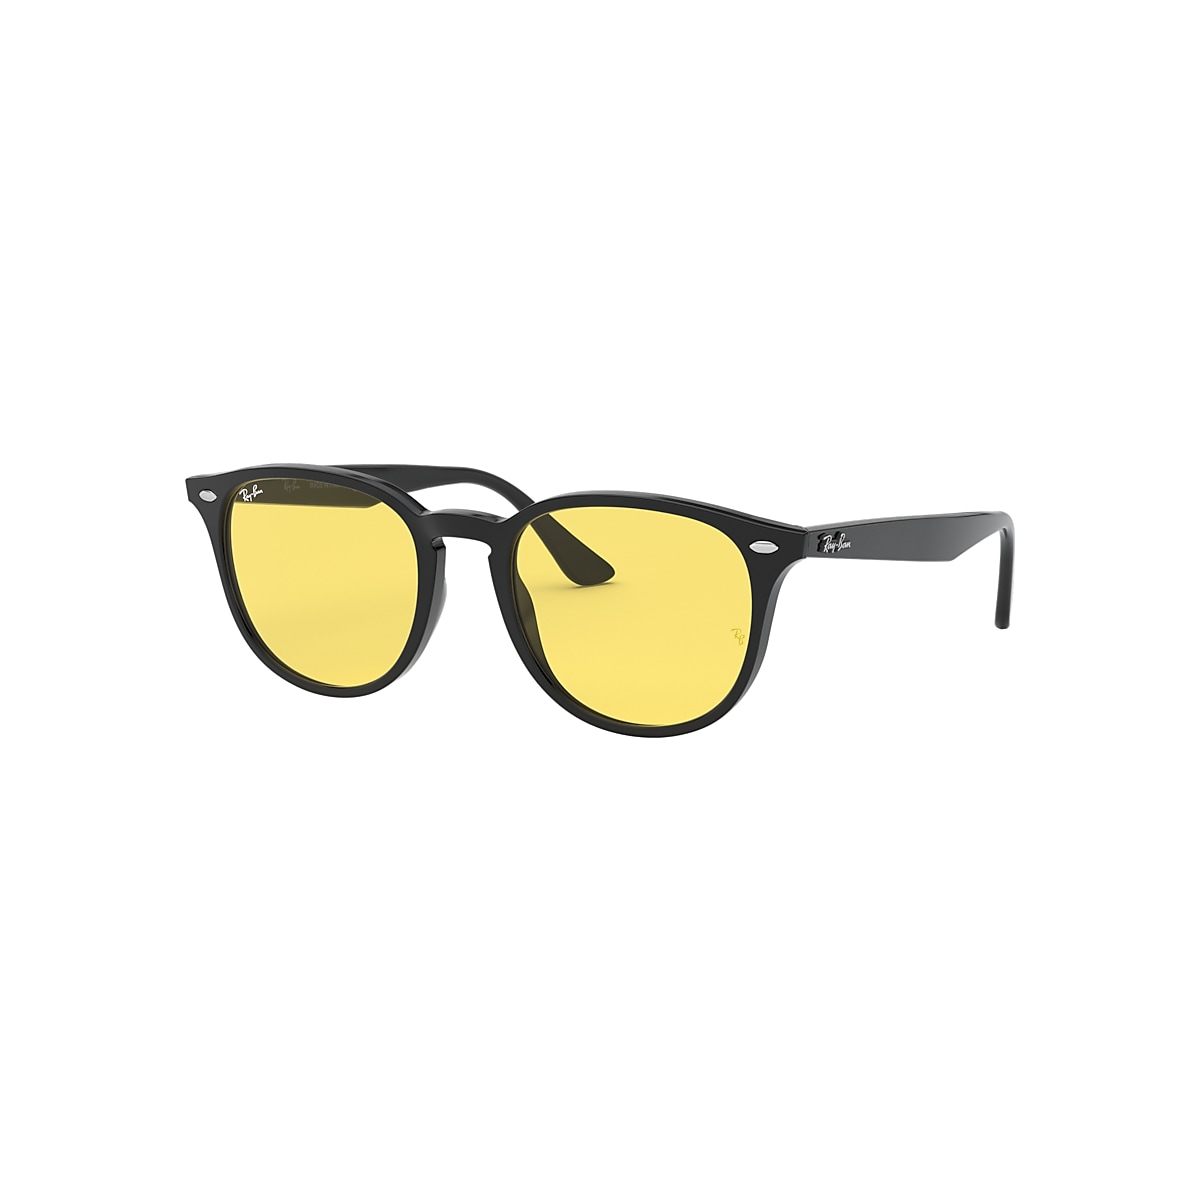 RB4259 WASHED LENSES Sunglasses in Black and Yellow - RB4259F 